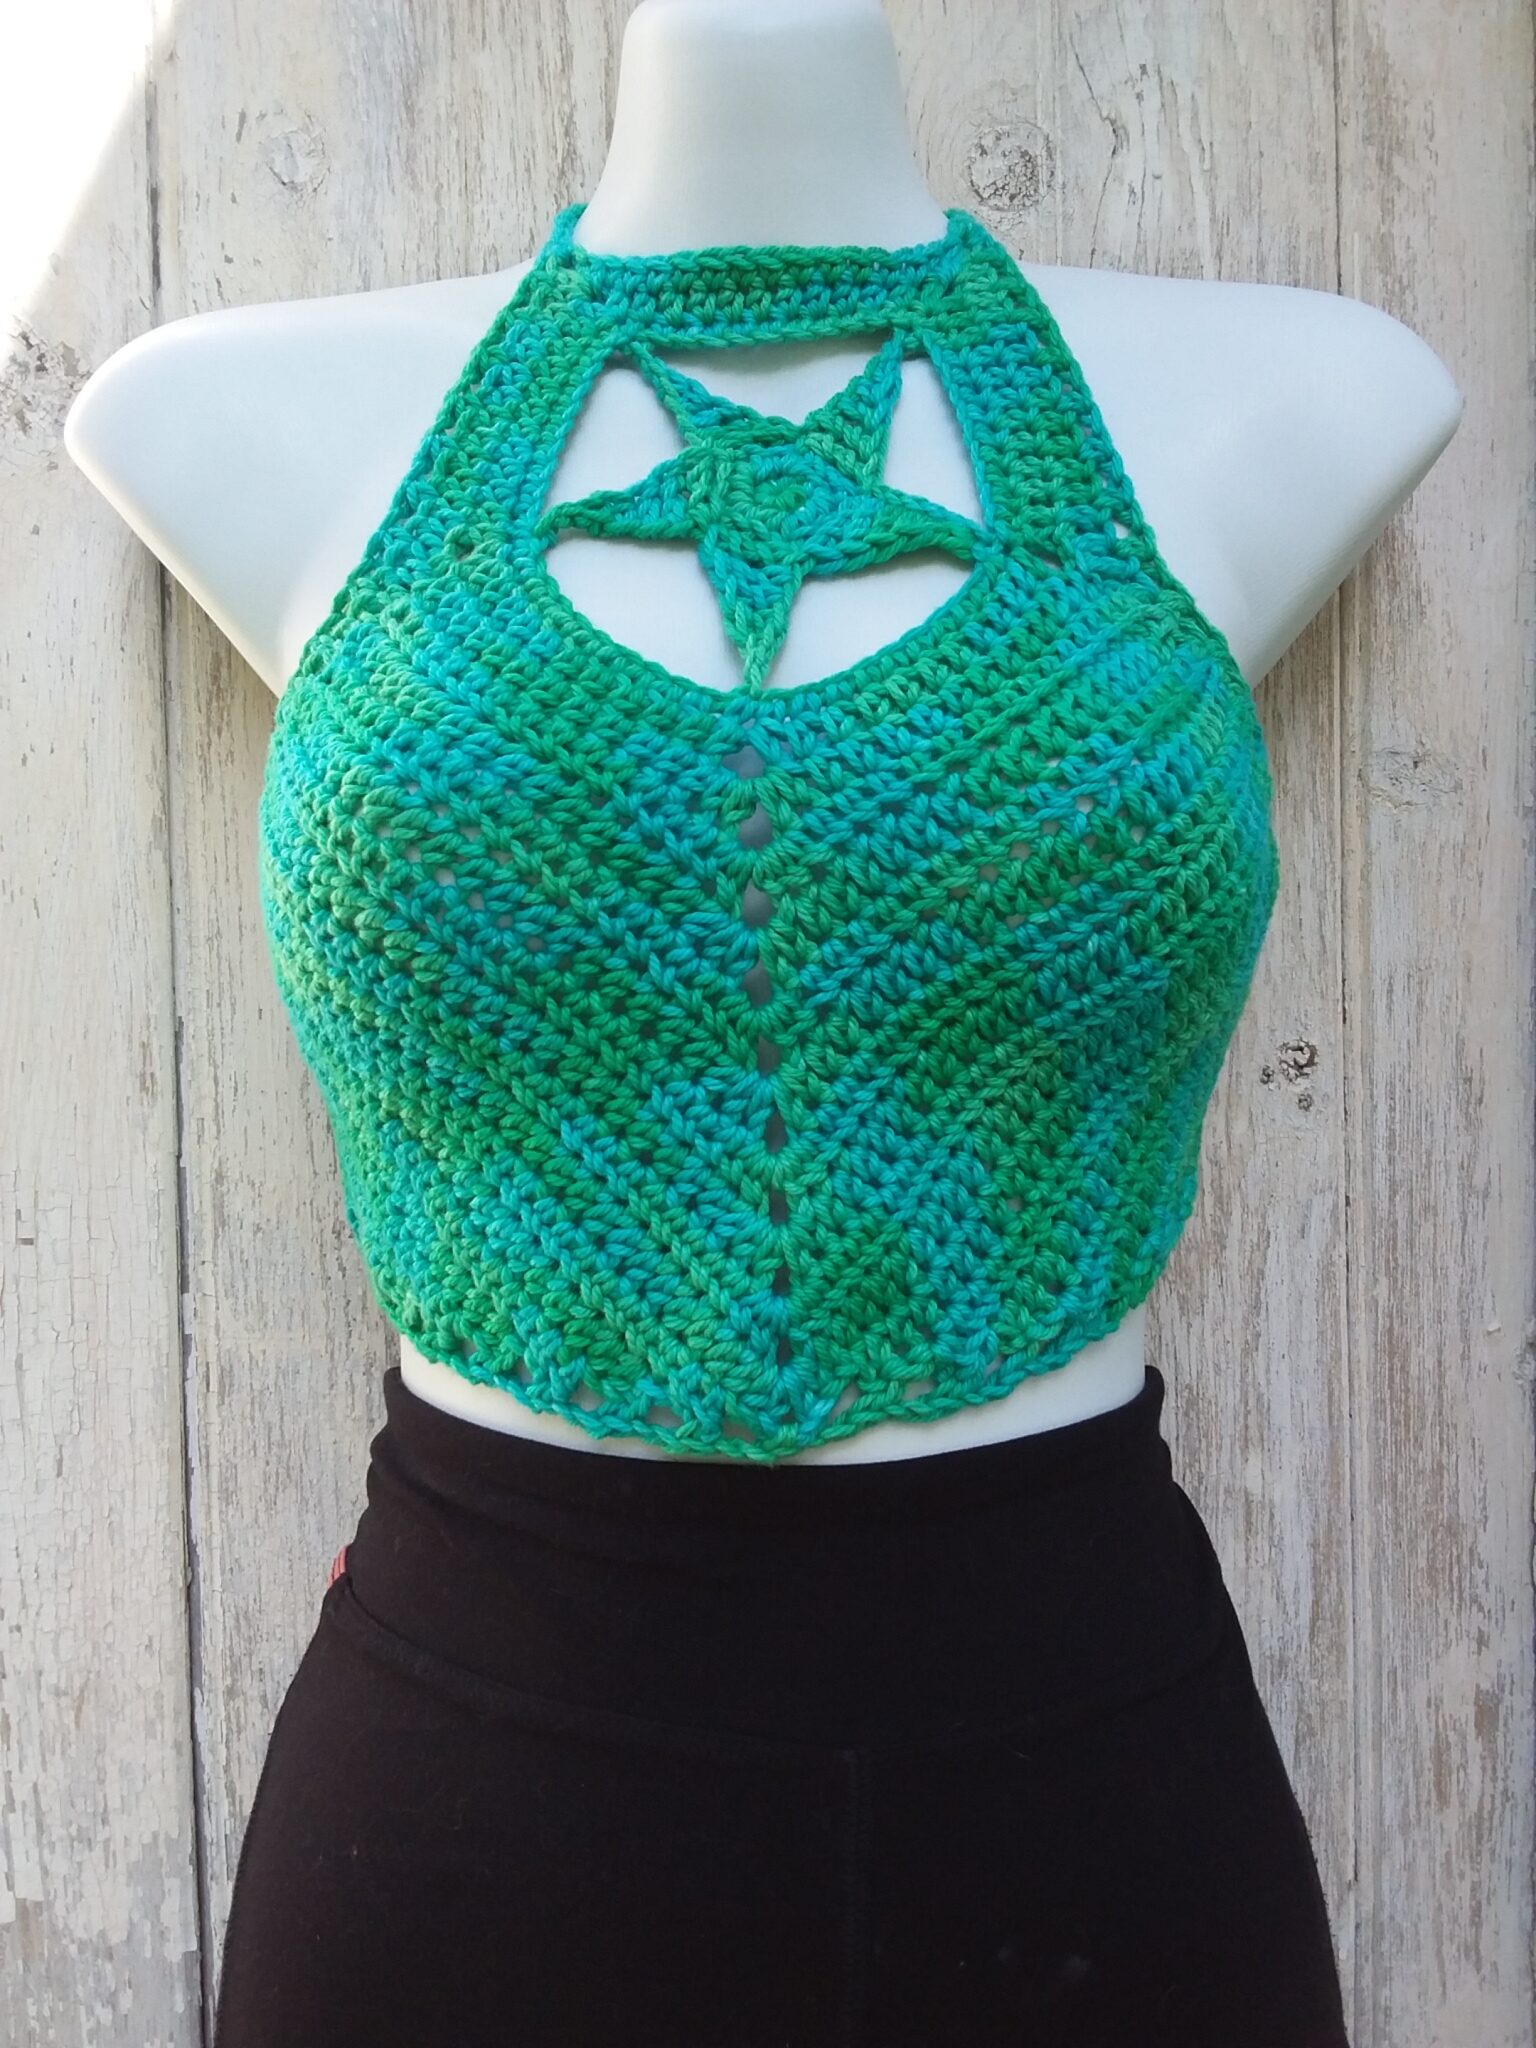 Crochet COTTON Halter Top Made to Order Size/color Festival Wear